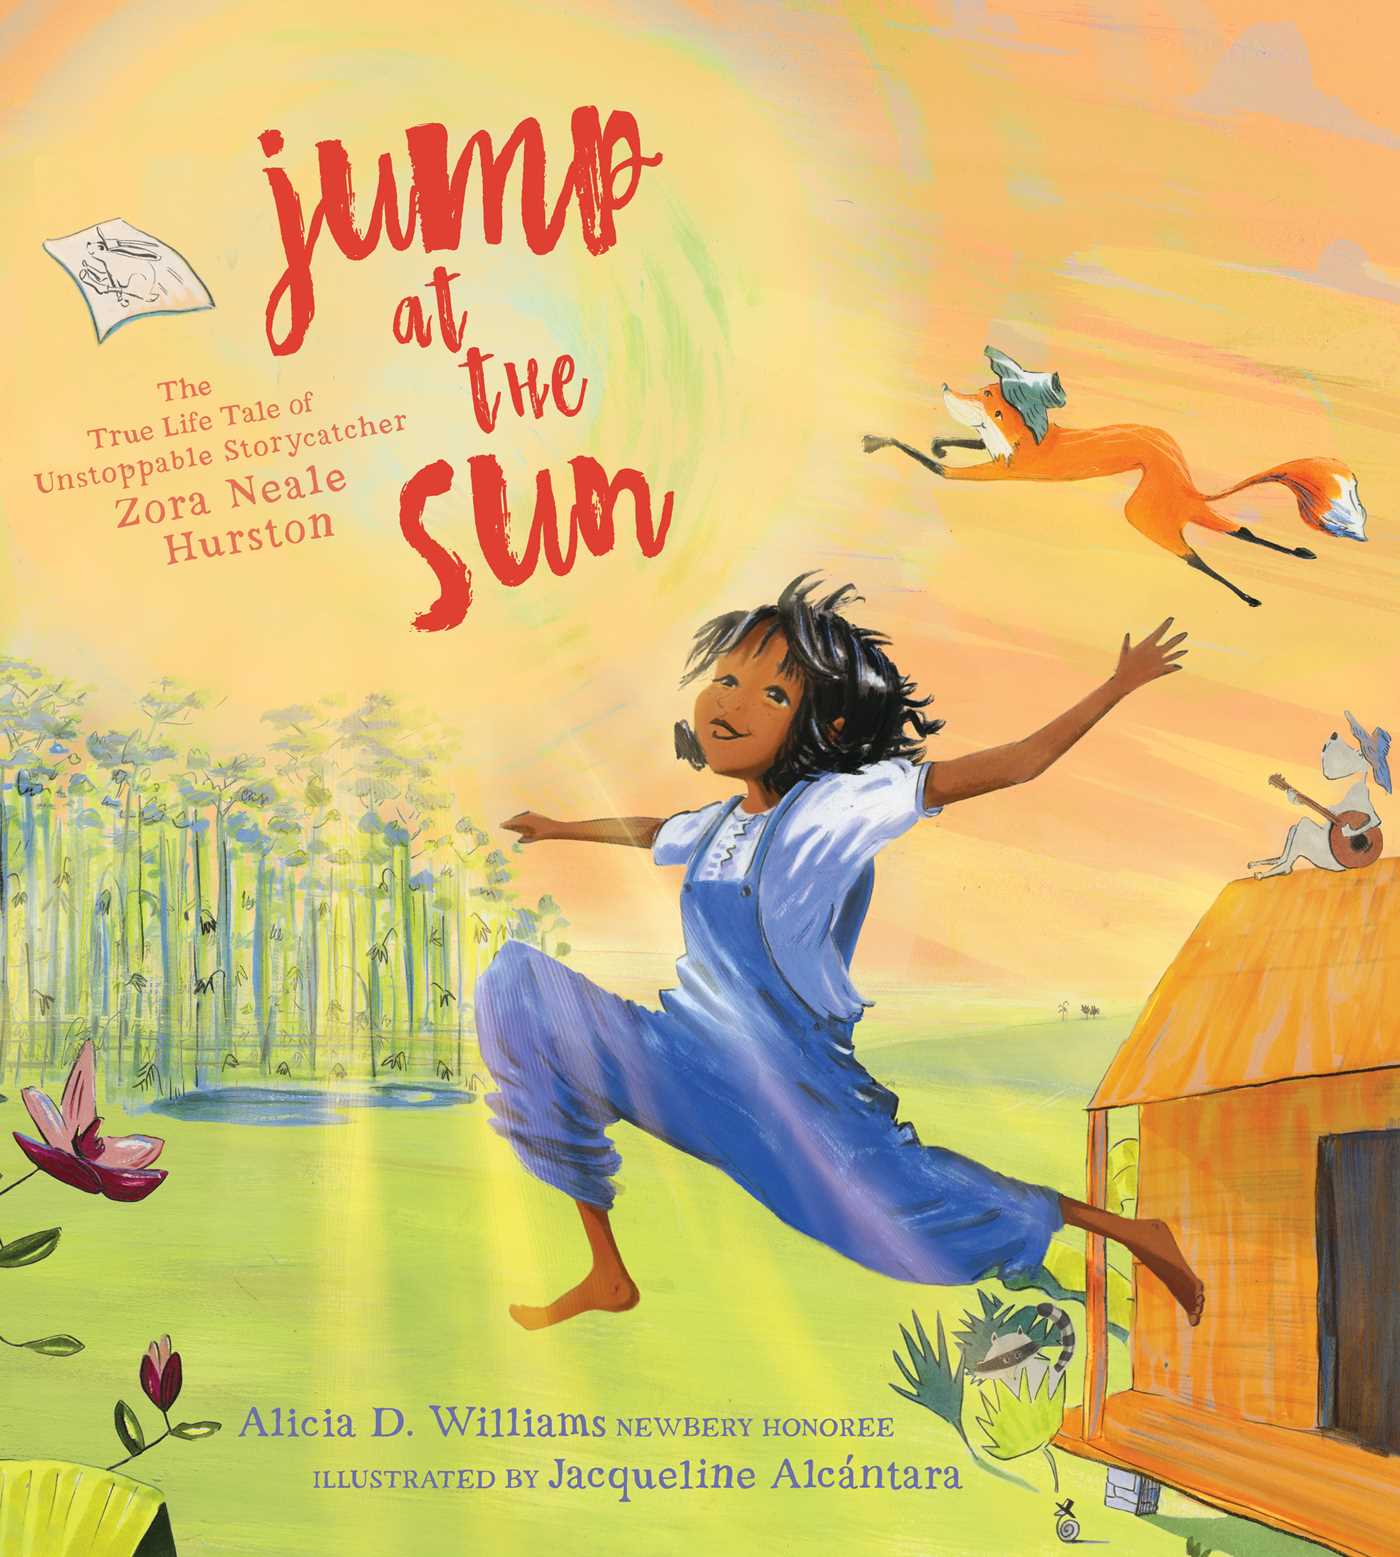 Jump at the sun book cover.